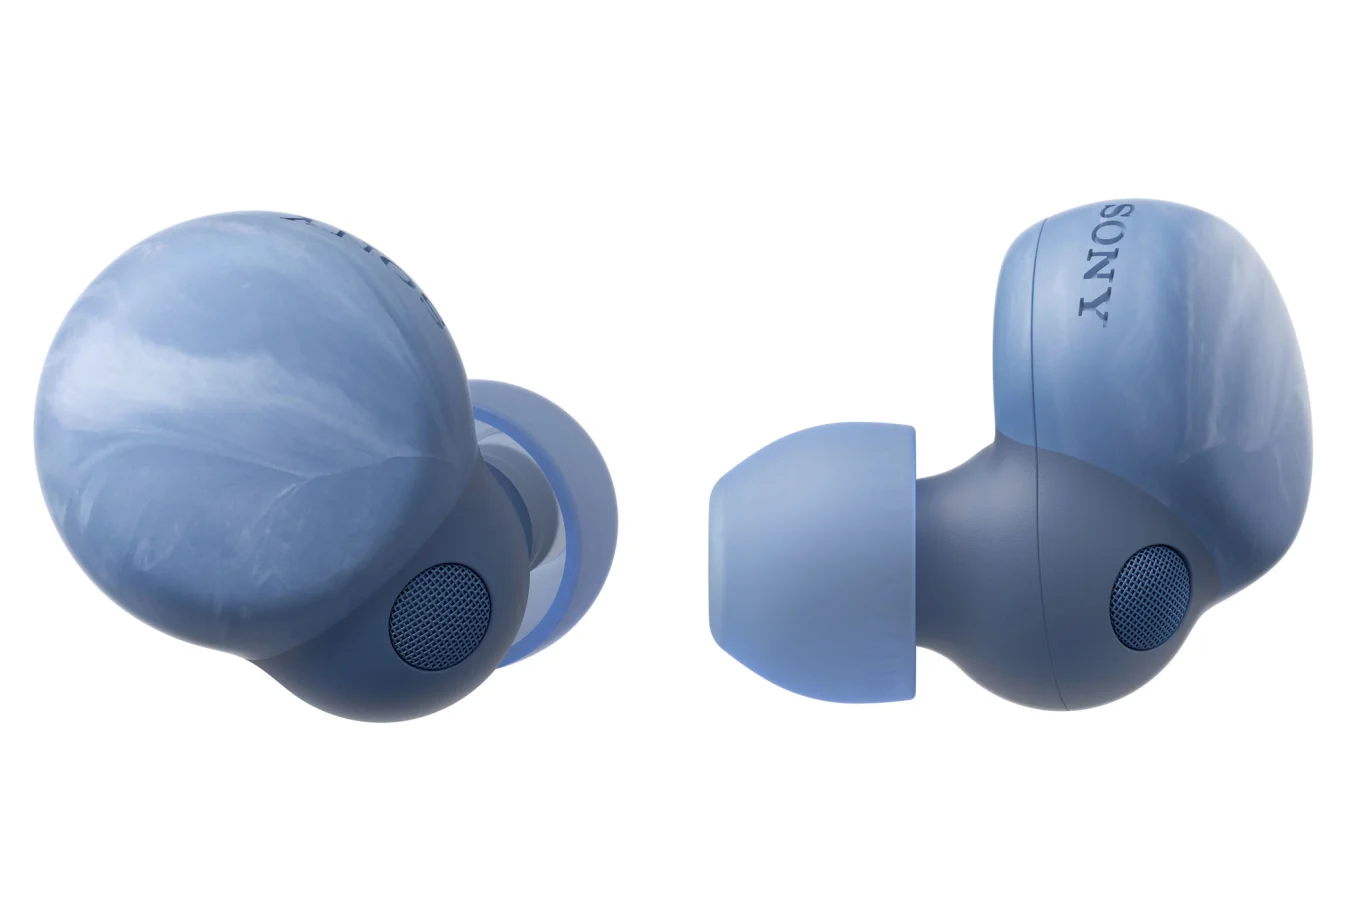 Sony made a version of the LinkBuds S using recycled water bottles